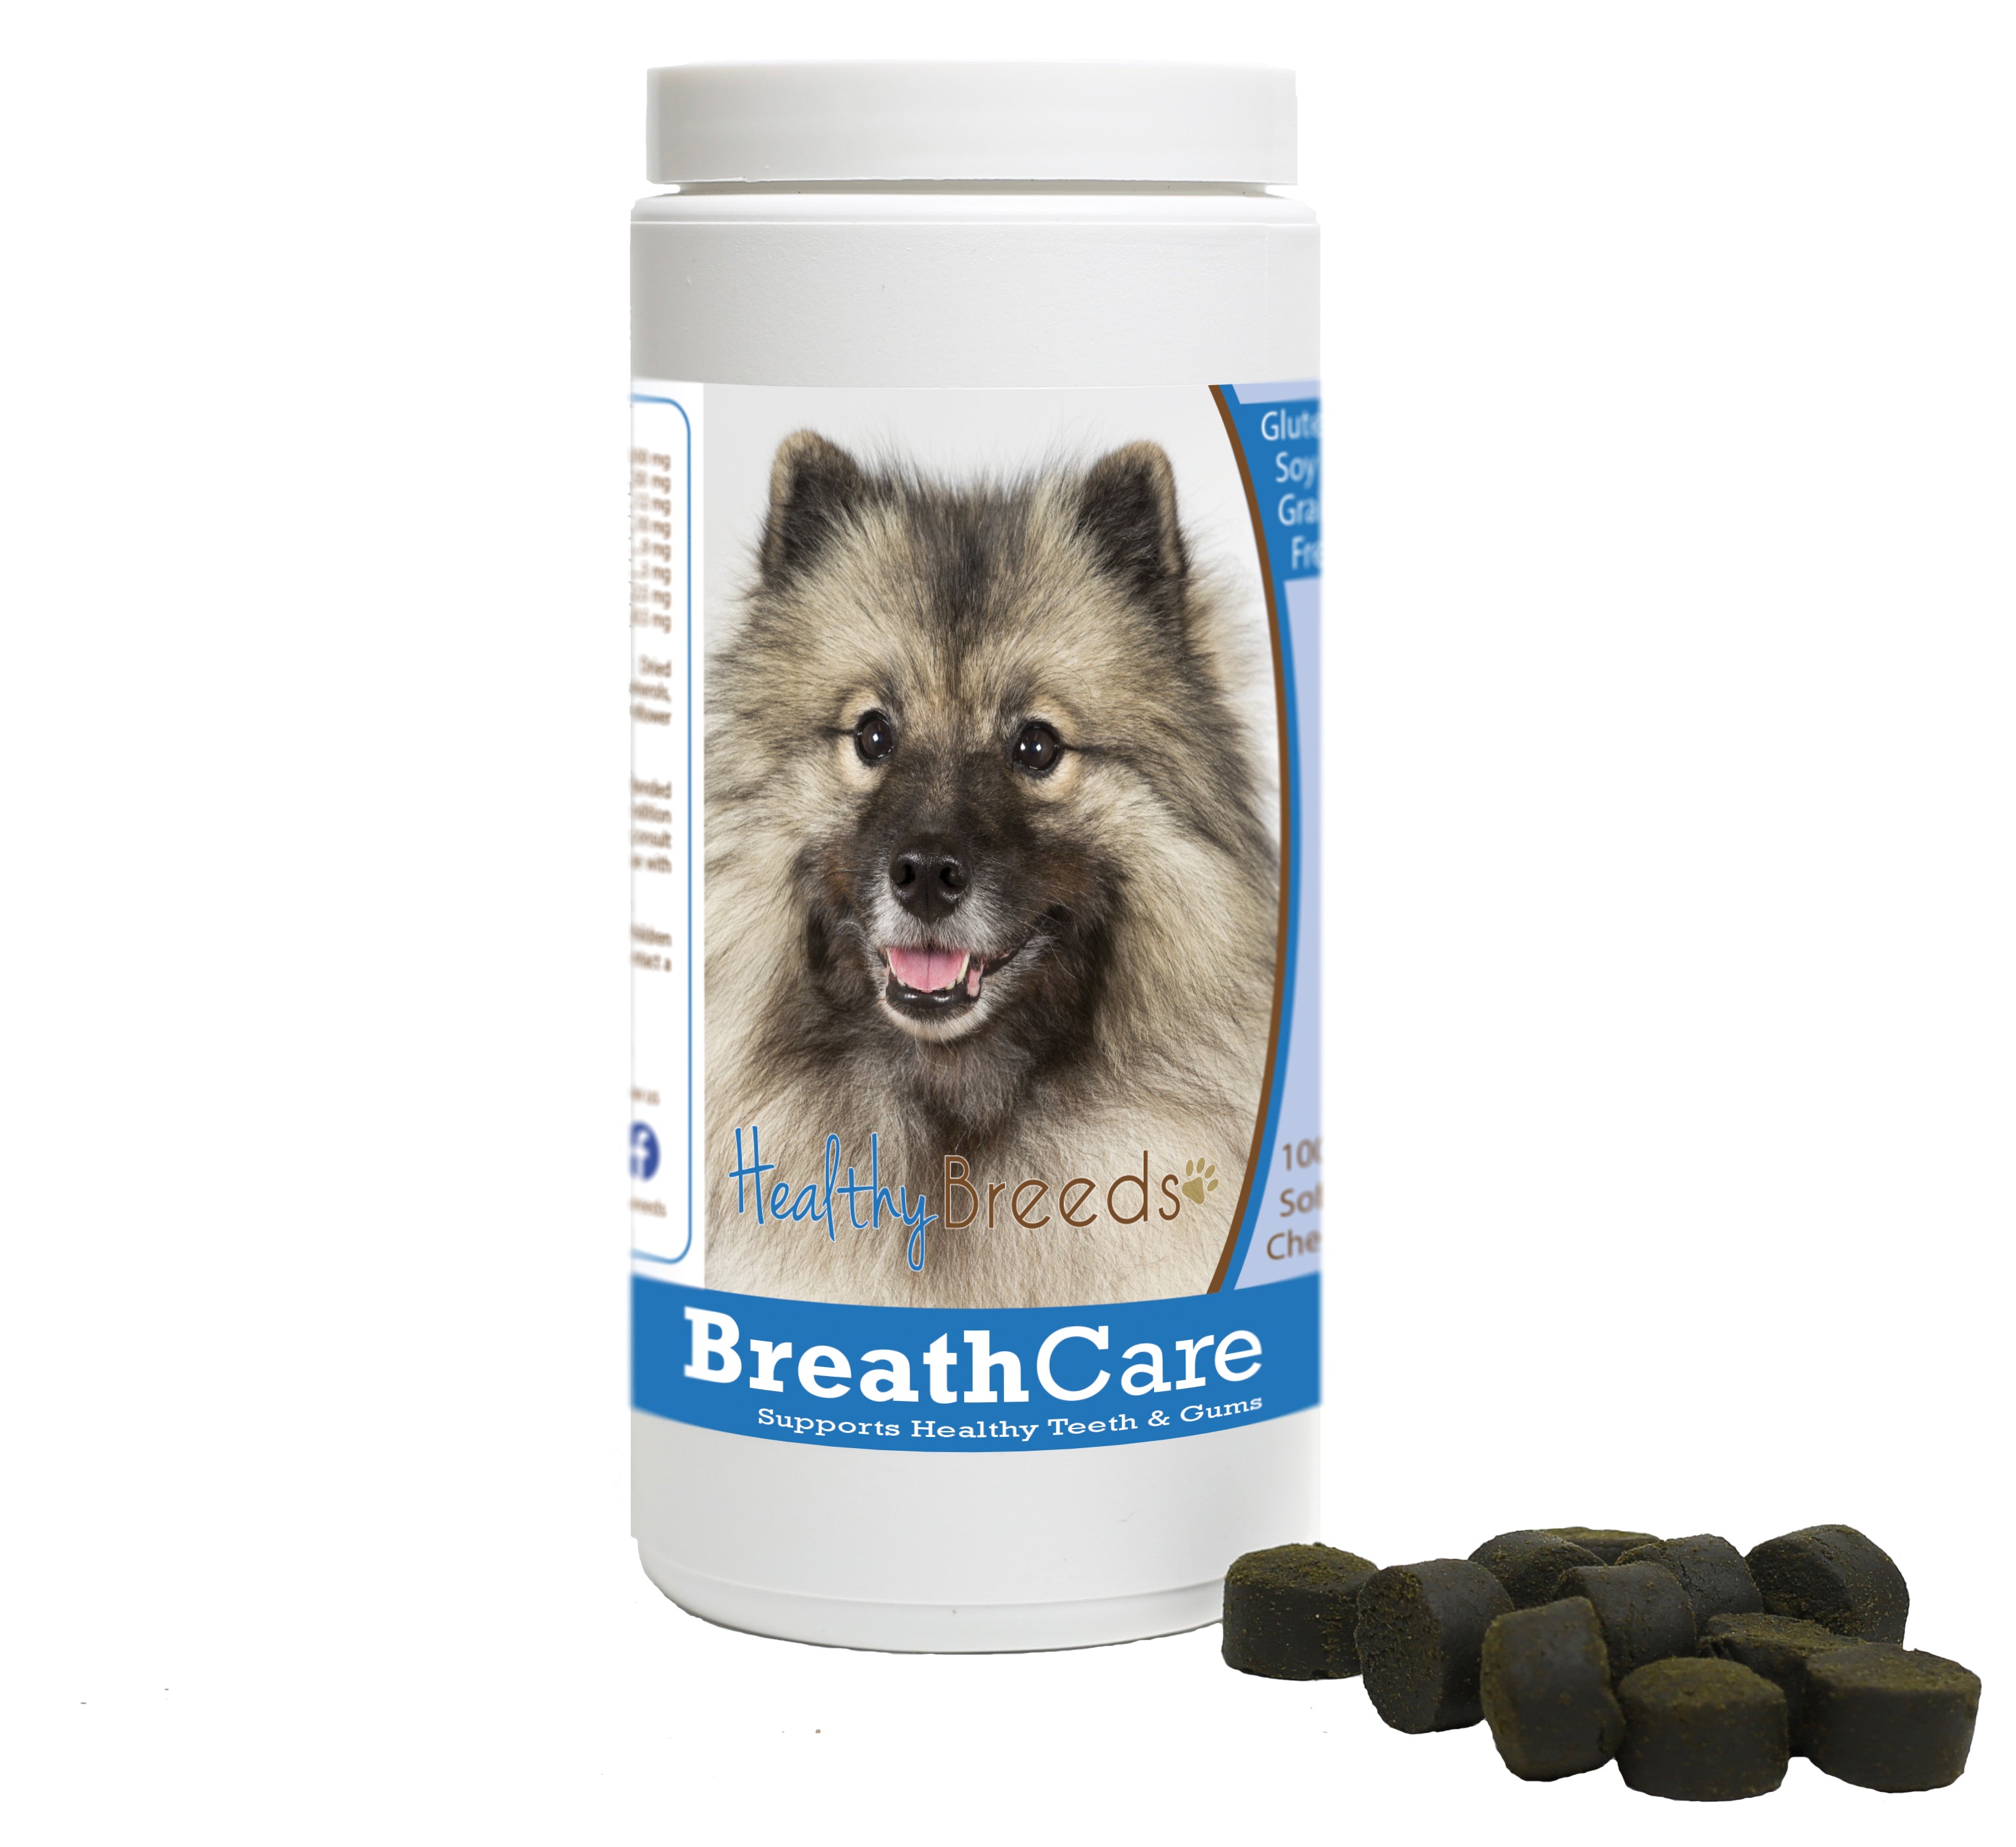 Keeshonden Breath Care Soft Chews for Dogs 100 Count